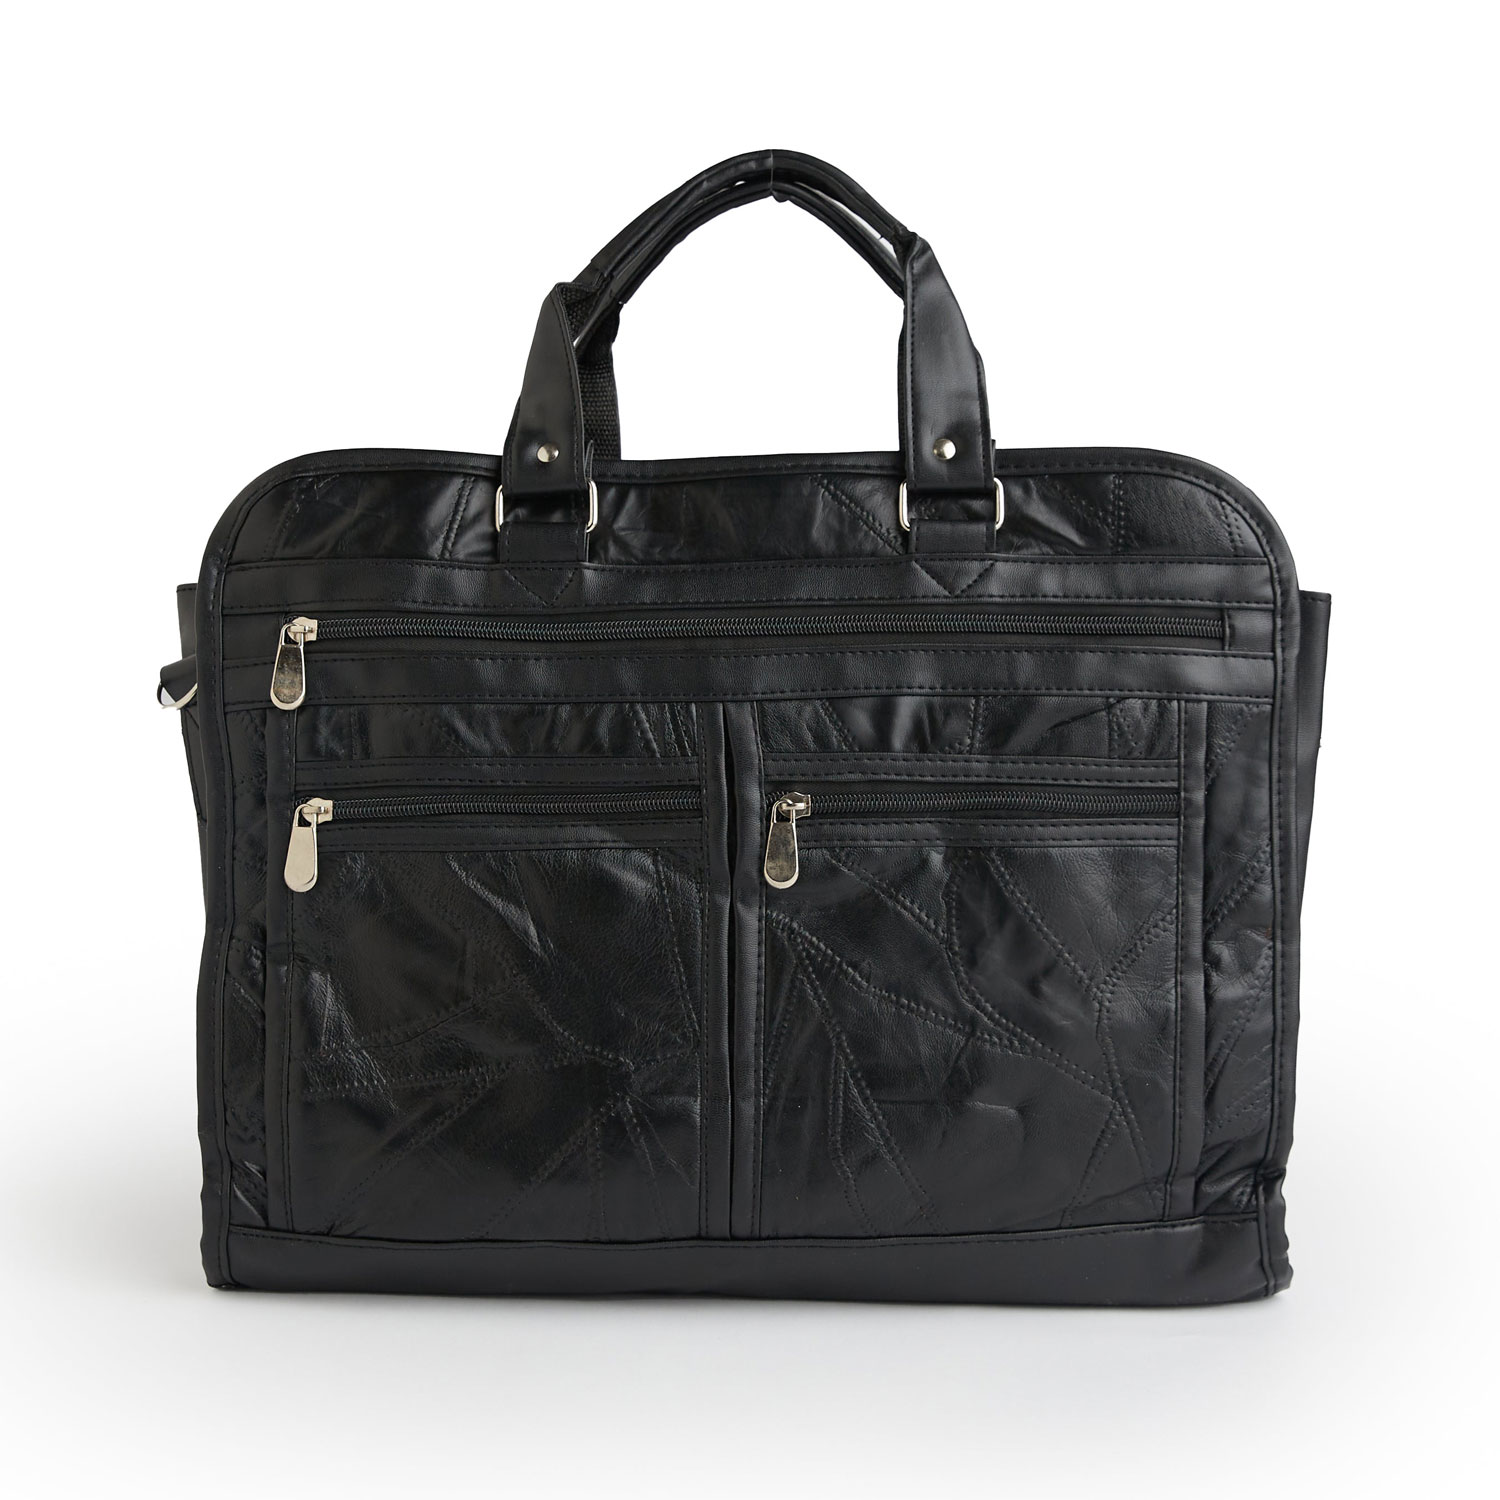 Black Leather Briefcase With Laptop Pocket